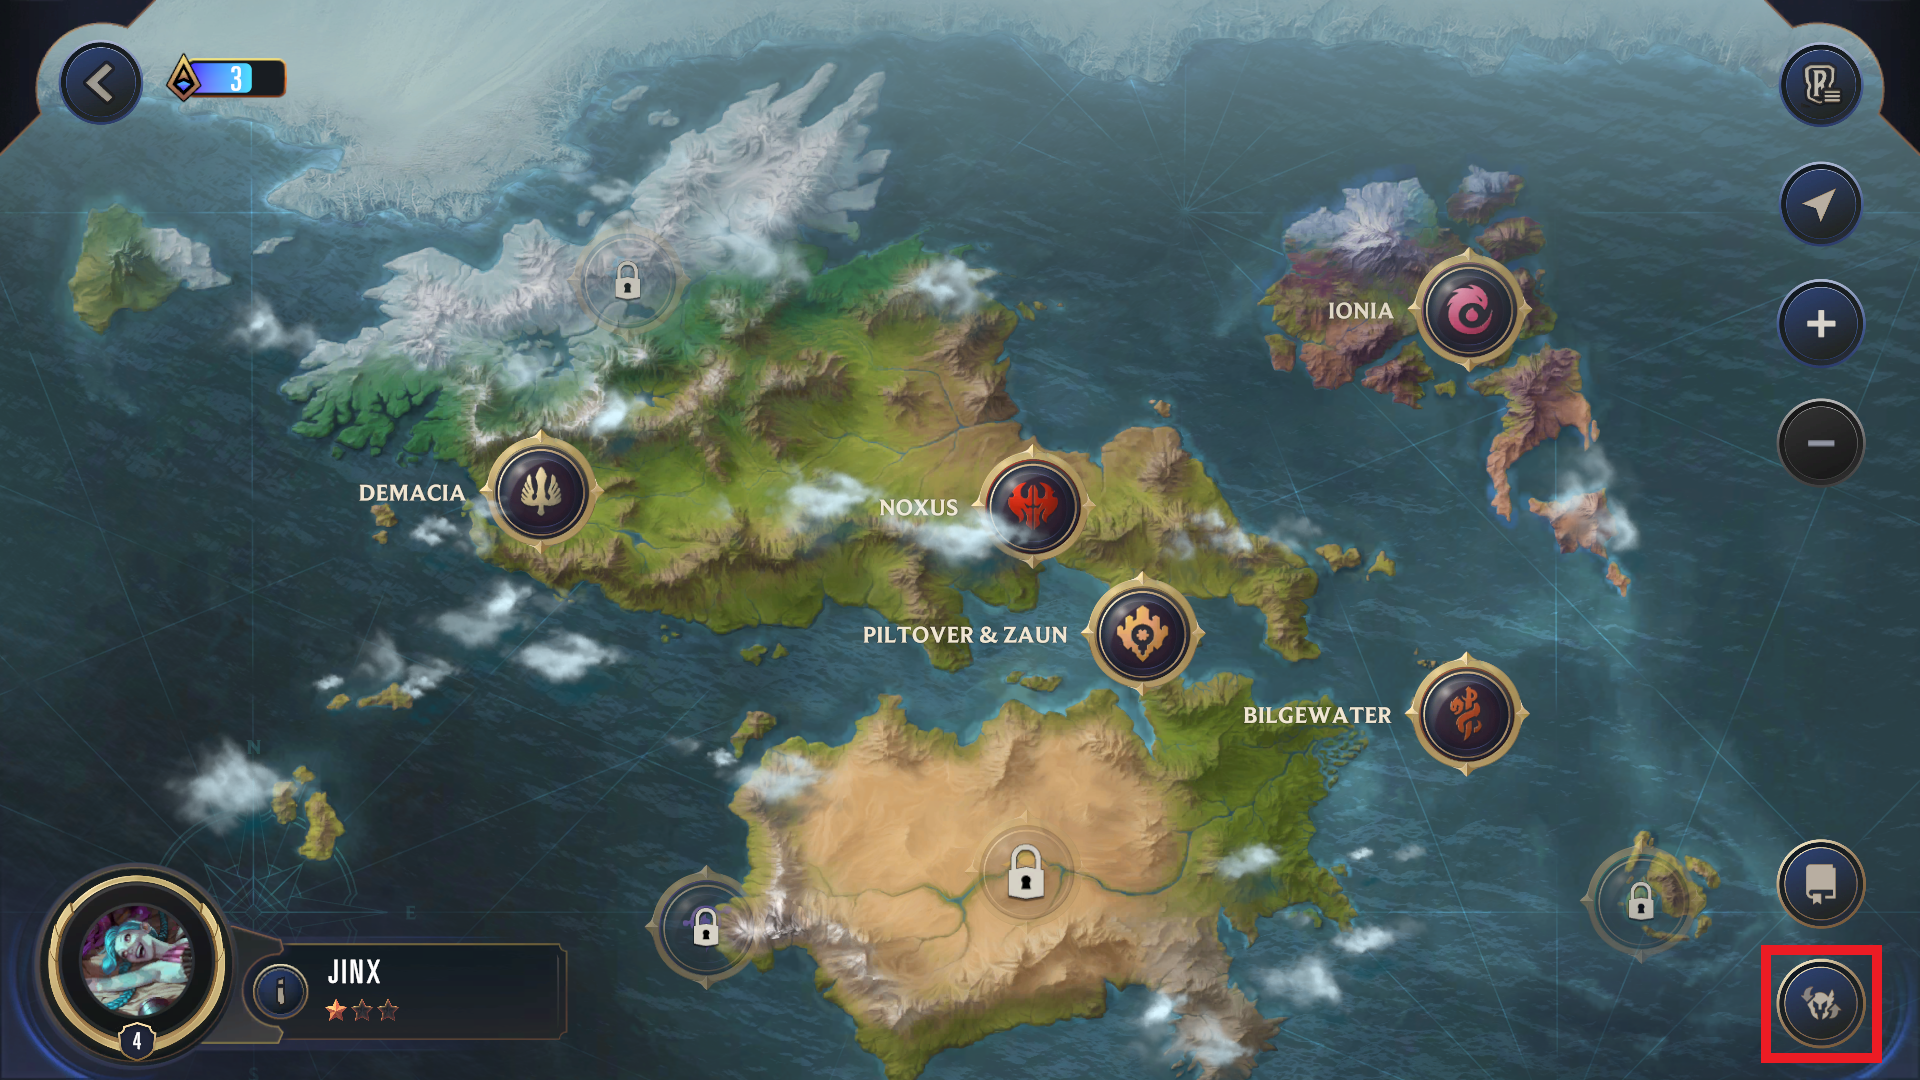 The Path of Champions World Map with the Champions icon, an ancient helmet, highlighted.